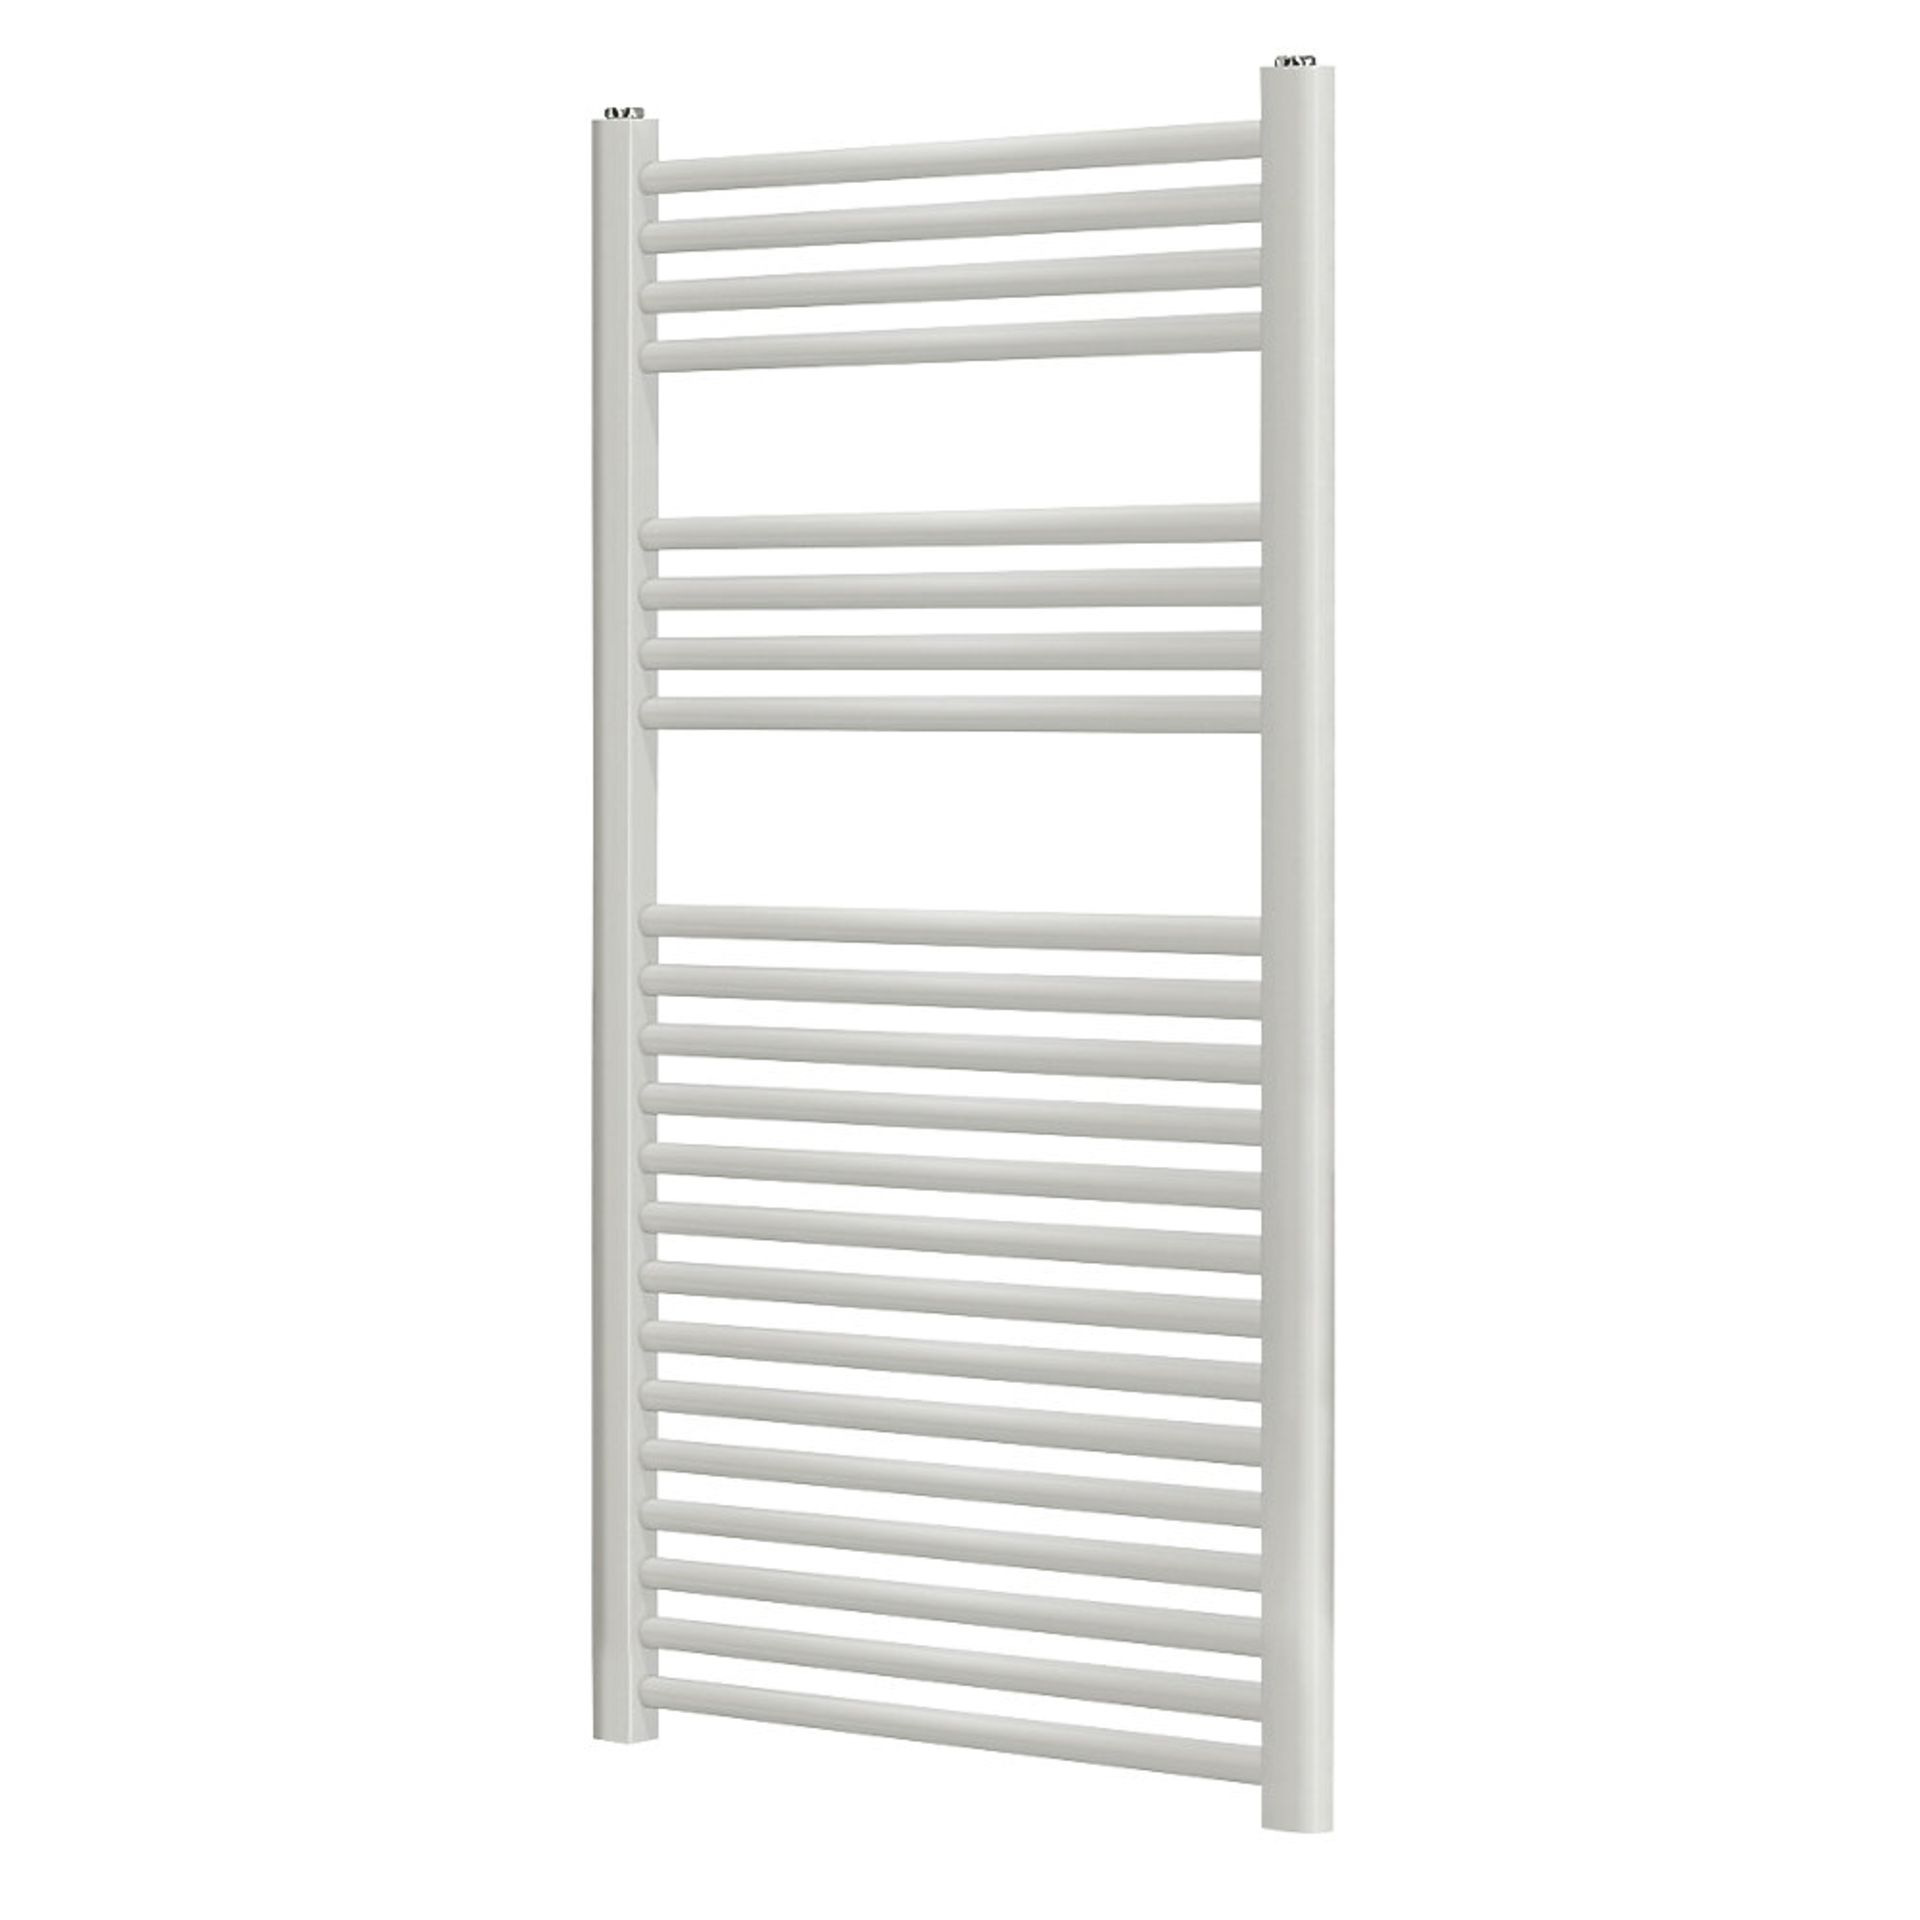 (PP212) 1100 X 500MM TOWEL RADIATOR WHITE. High quality steel construction with a matt white finish. - Image 2 of 4